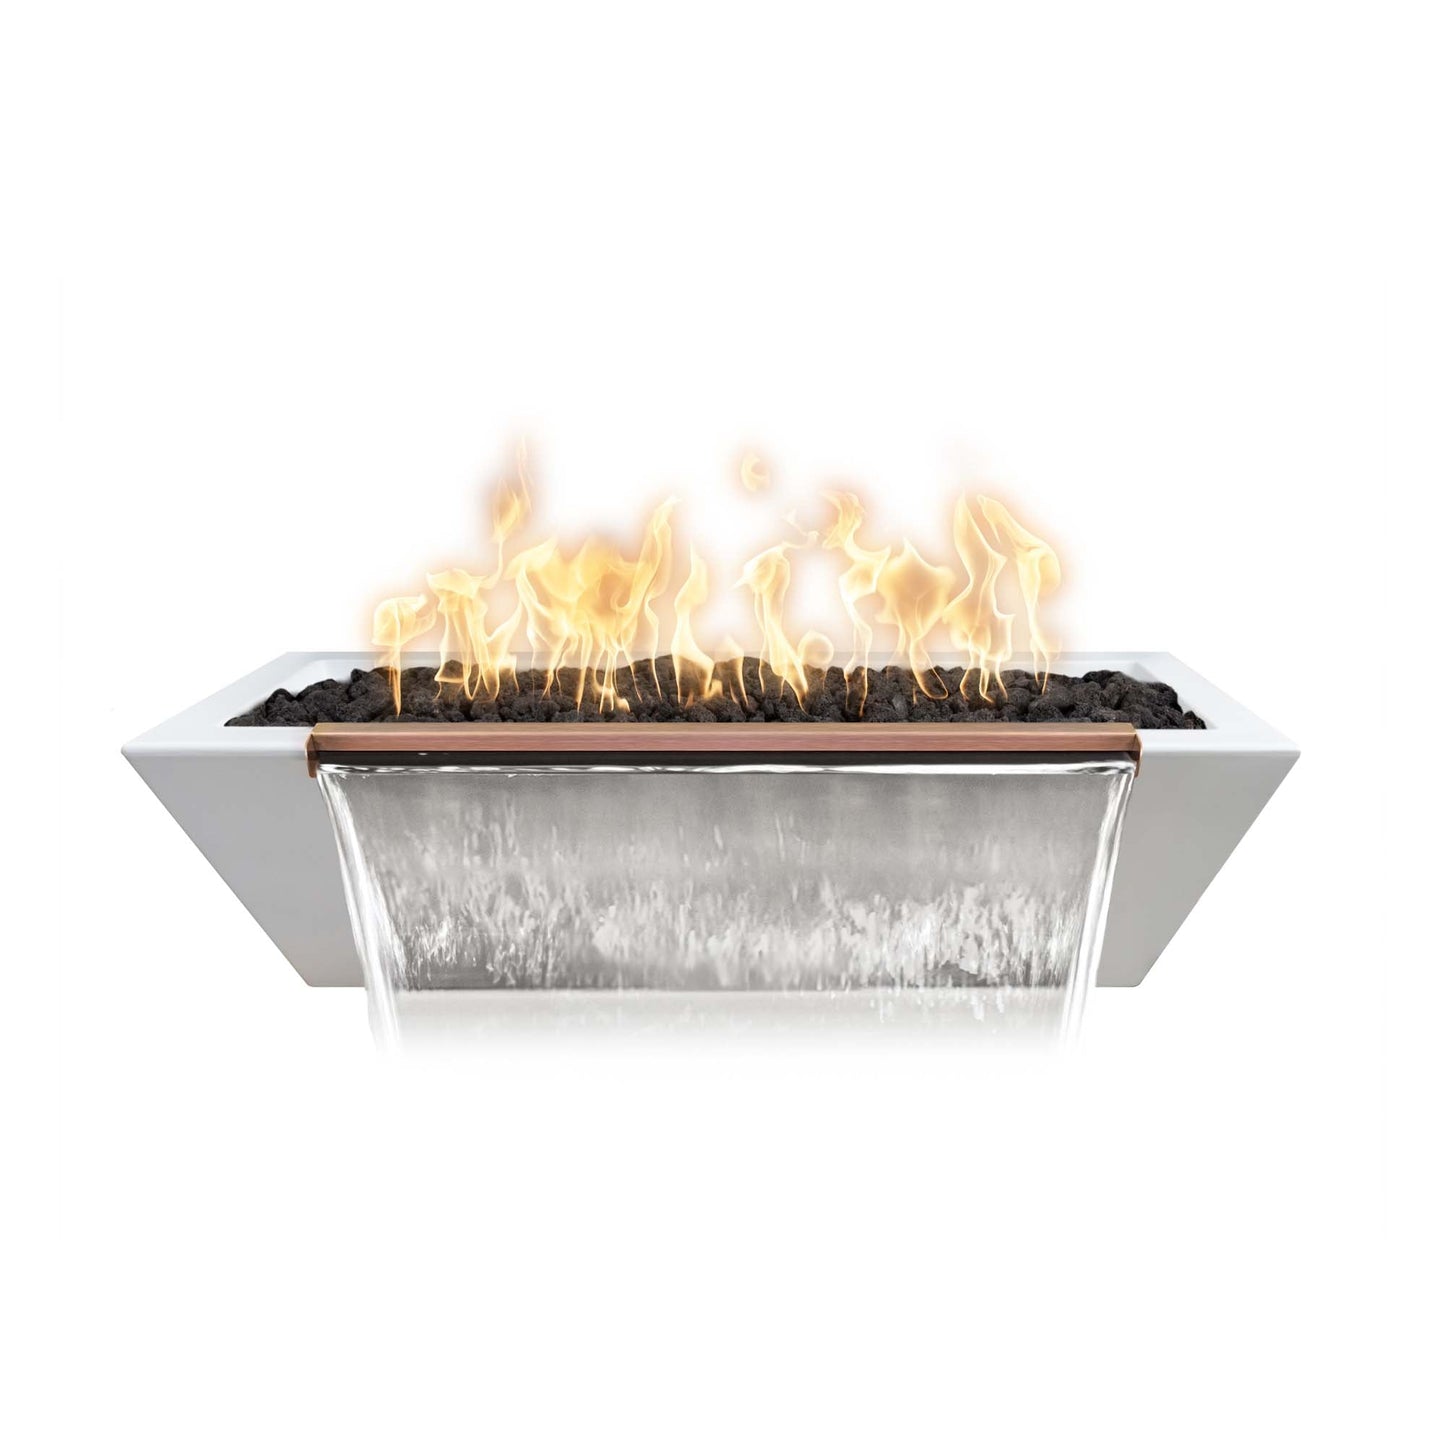 The Outdoor Plus Linear Maya 60" Chocolate GFRC Concrete Natural Gas Fire & Water Bowl with 12V Electronic Ignition